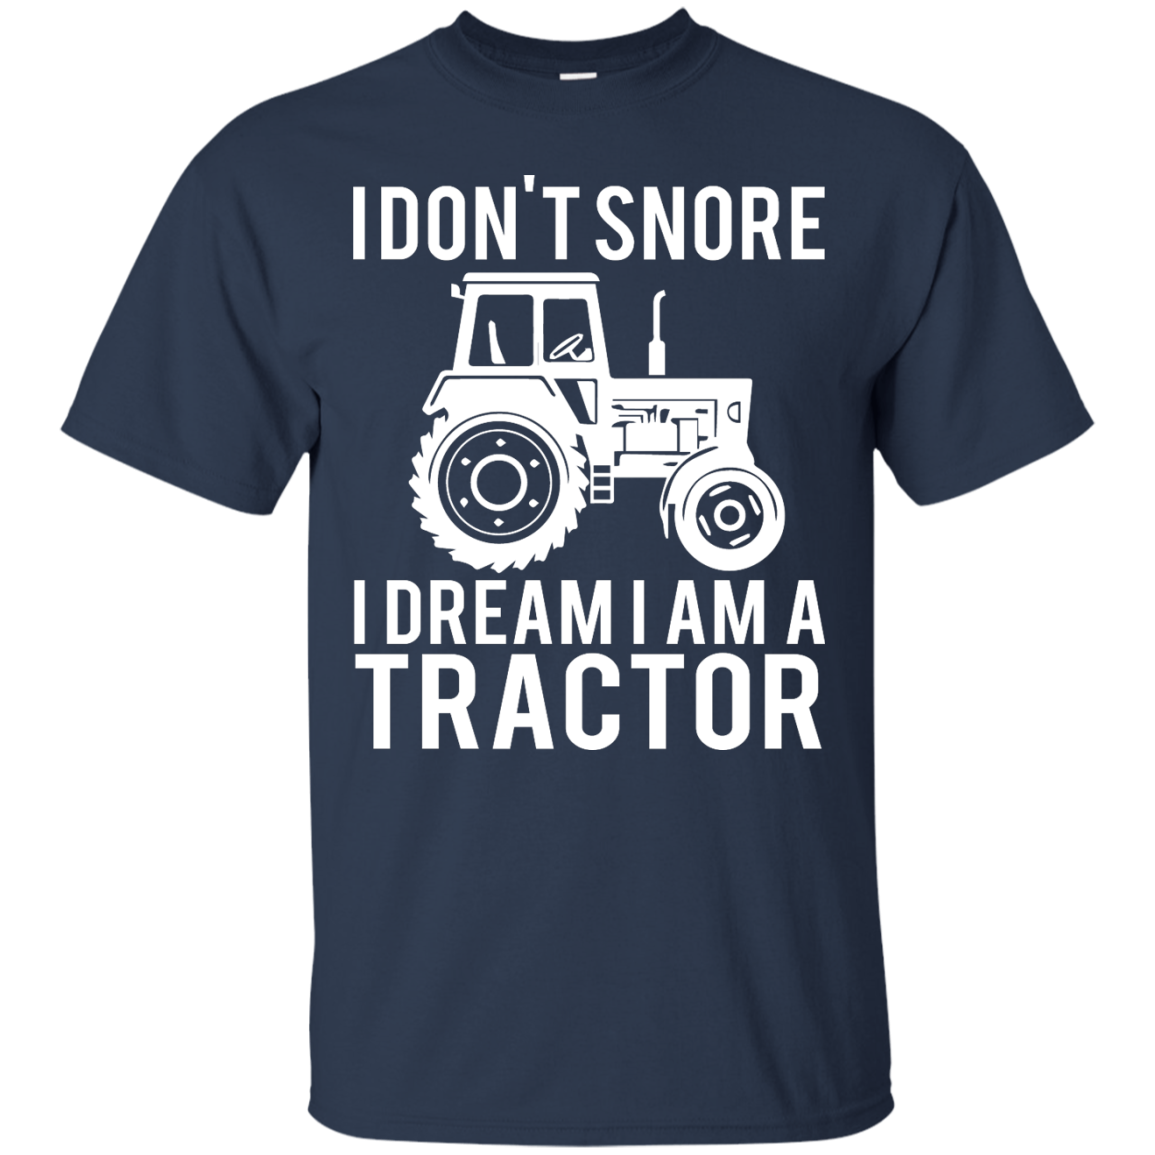 I Don't Snore I Dream I'm a Tractor Shirt, Sweater, Tank